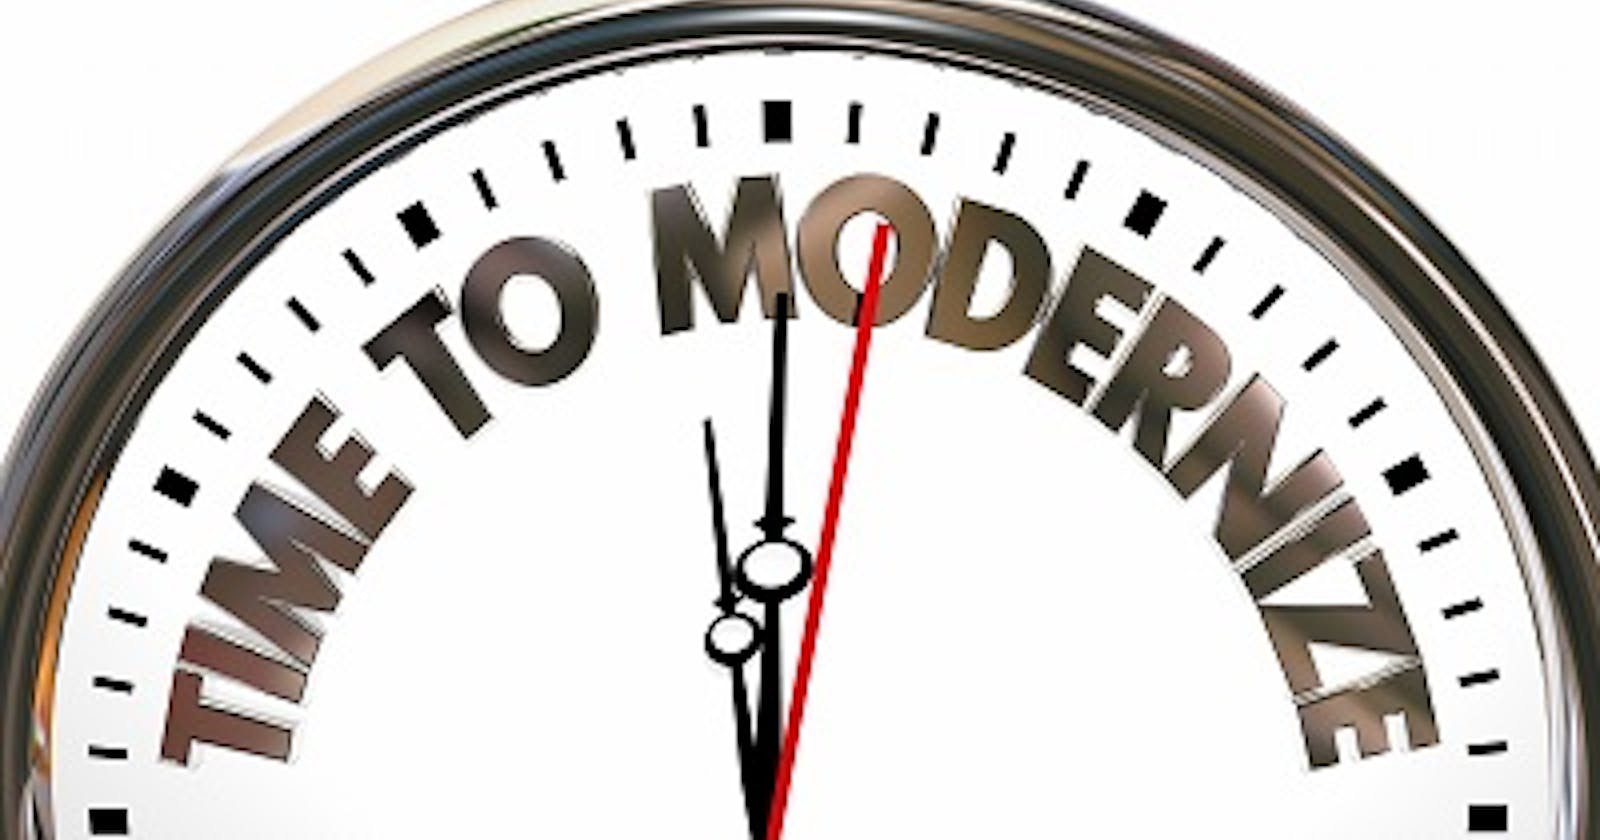 7 Reasons to Modernize Your .NET Applications